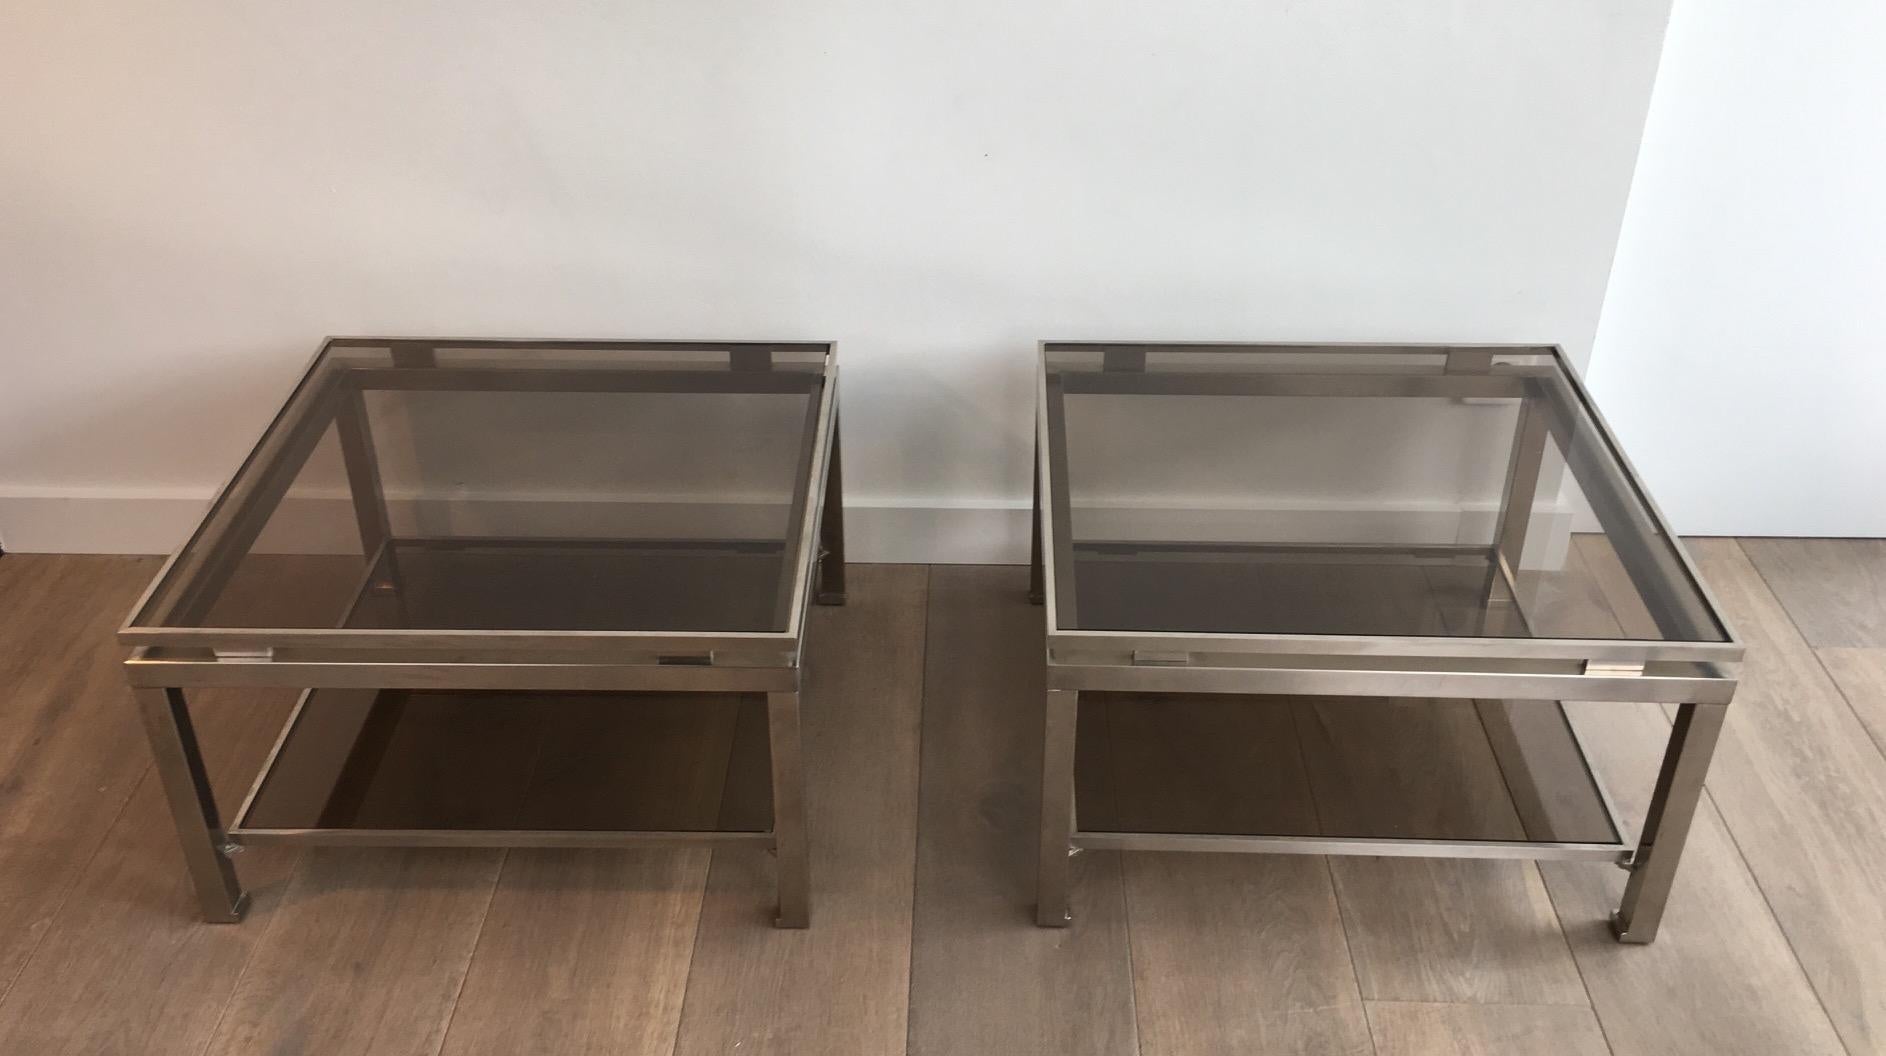 This rare and beautiful pair of side tables is made of brushed steel with smoked glass shelves. The model is rare, really nice and the quality very good. This is a French work by famous designer Guy Lefèvre for Maison Jansen. Circa 1970.